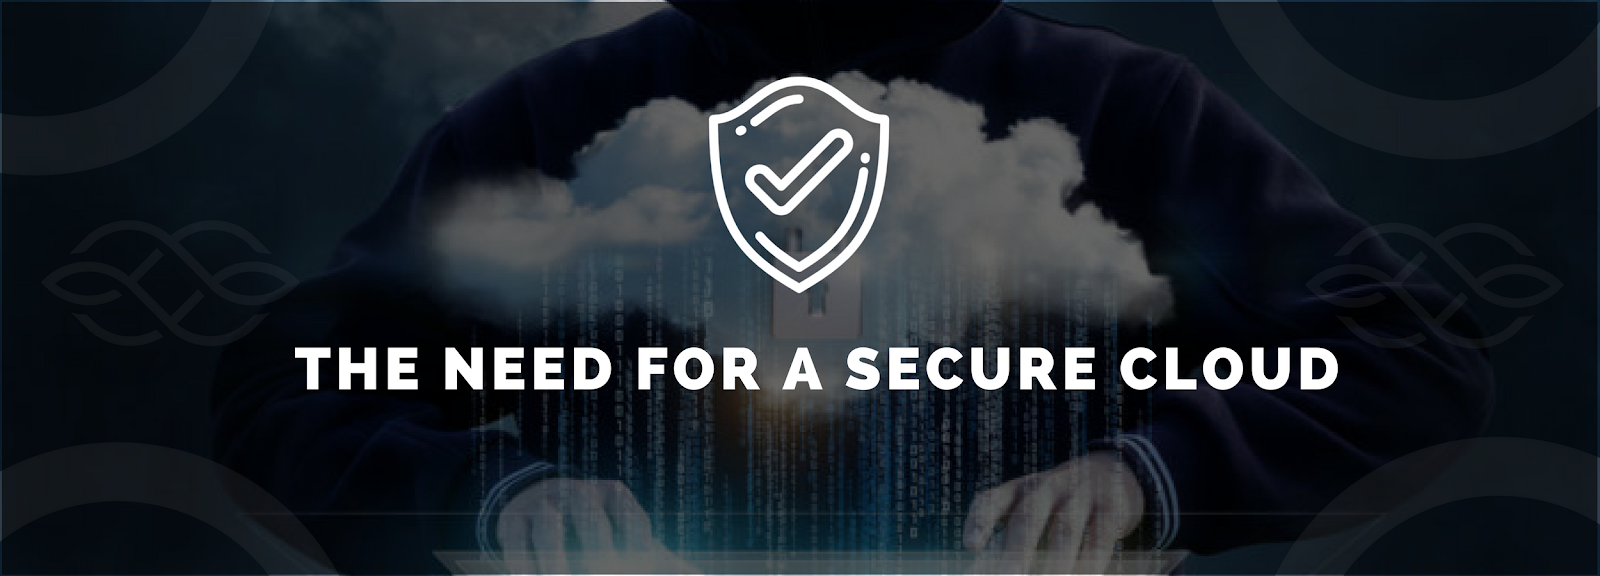 The Need for a Secure Cloud